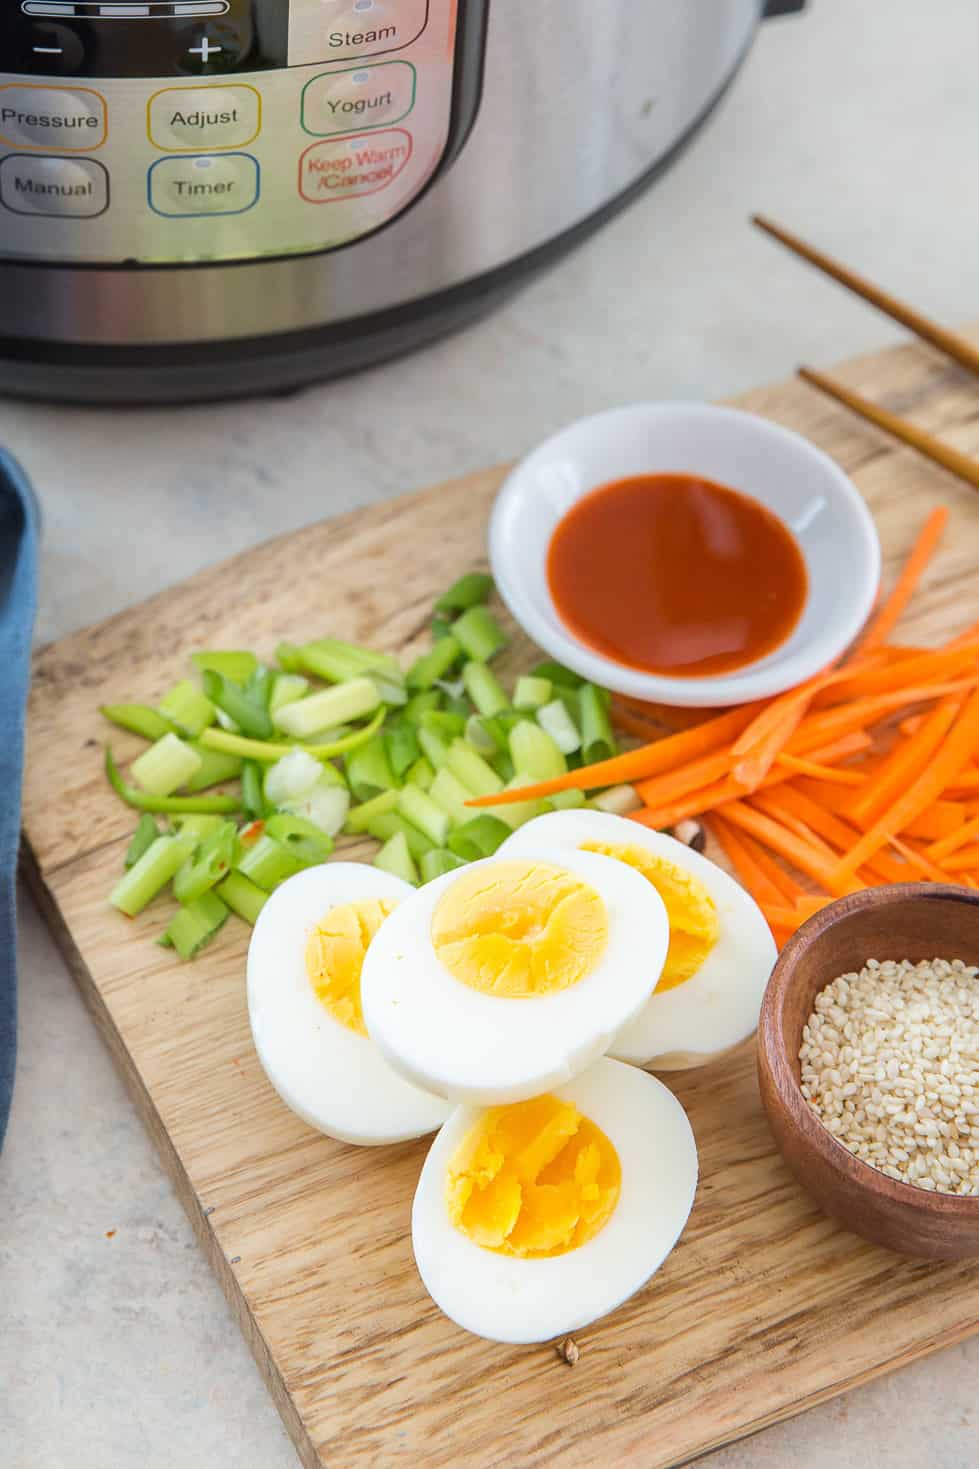 Soft boiled eggs sliced in half on a cutting board with carrots and green onions.